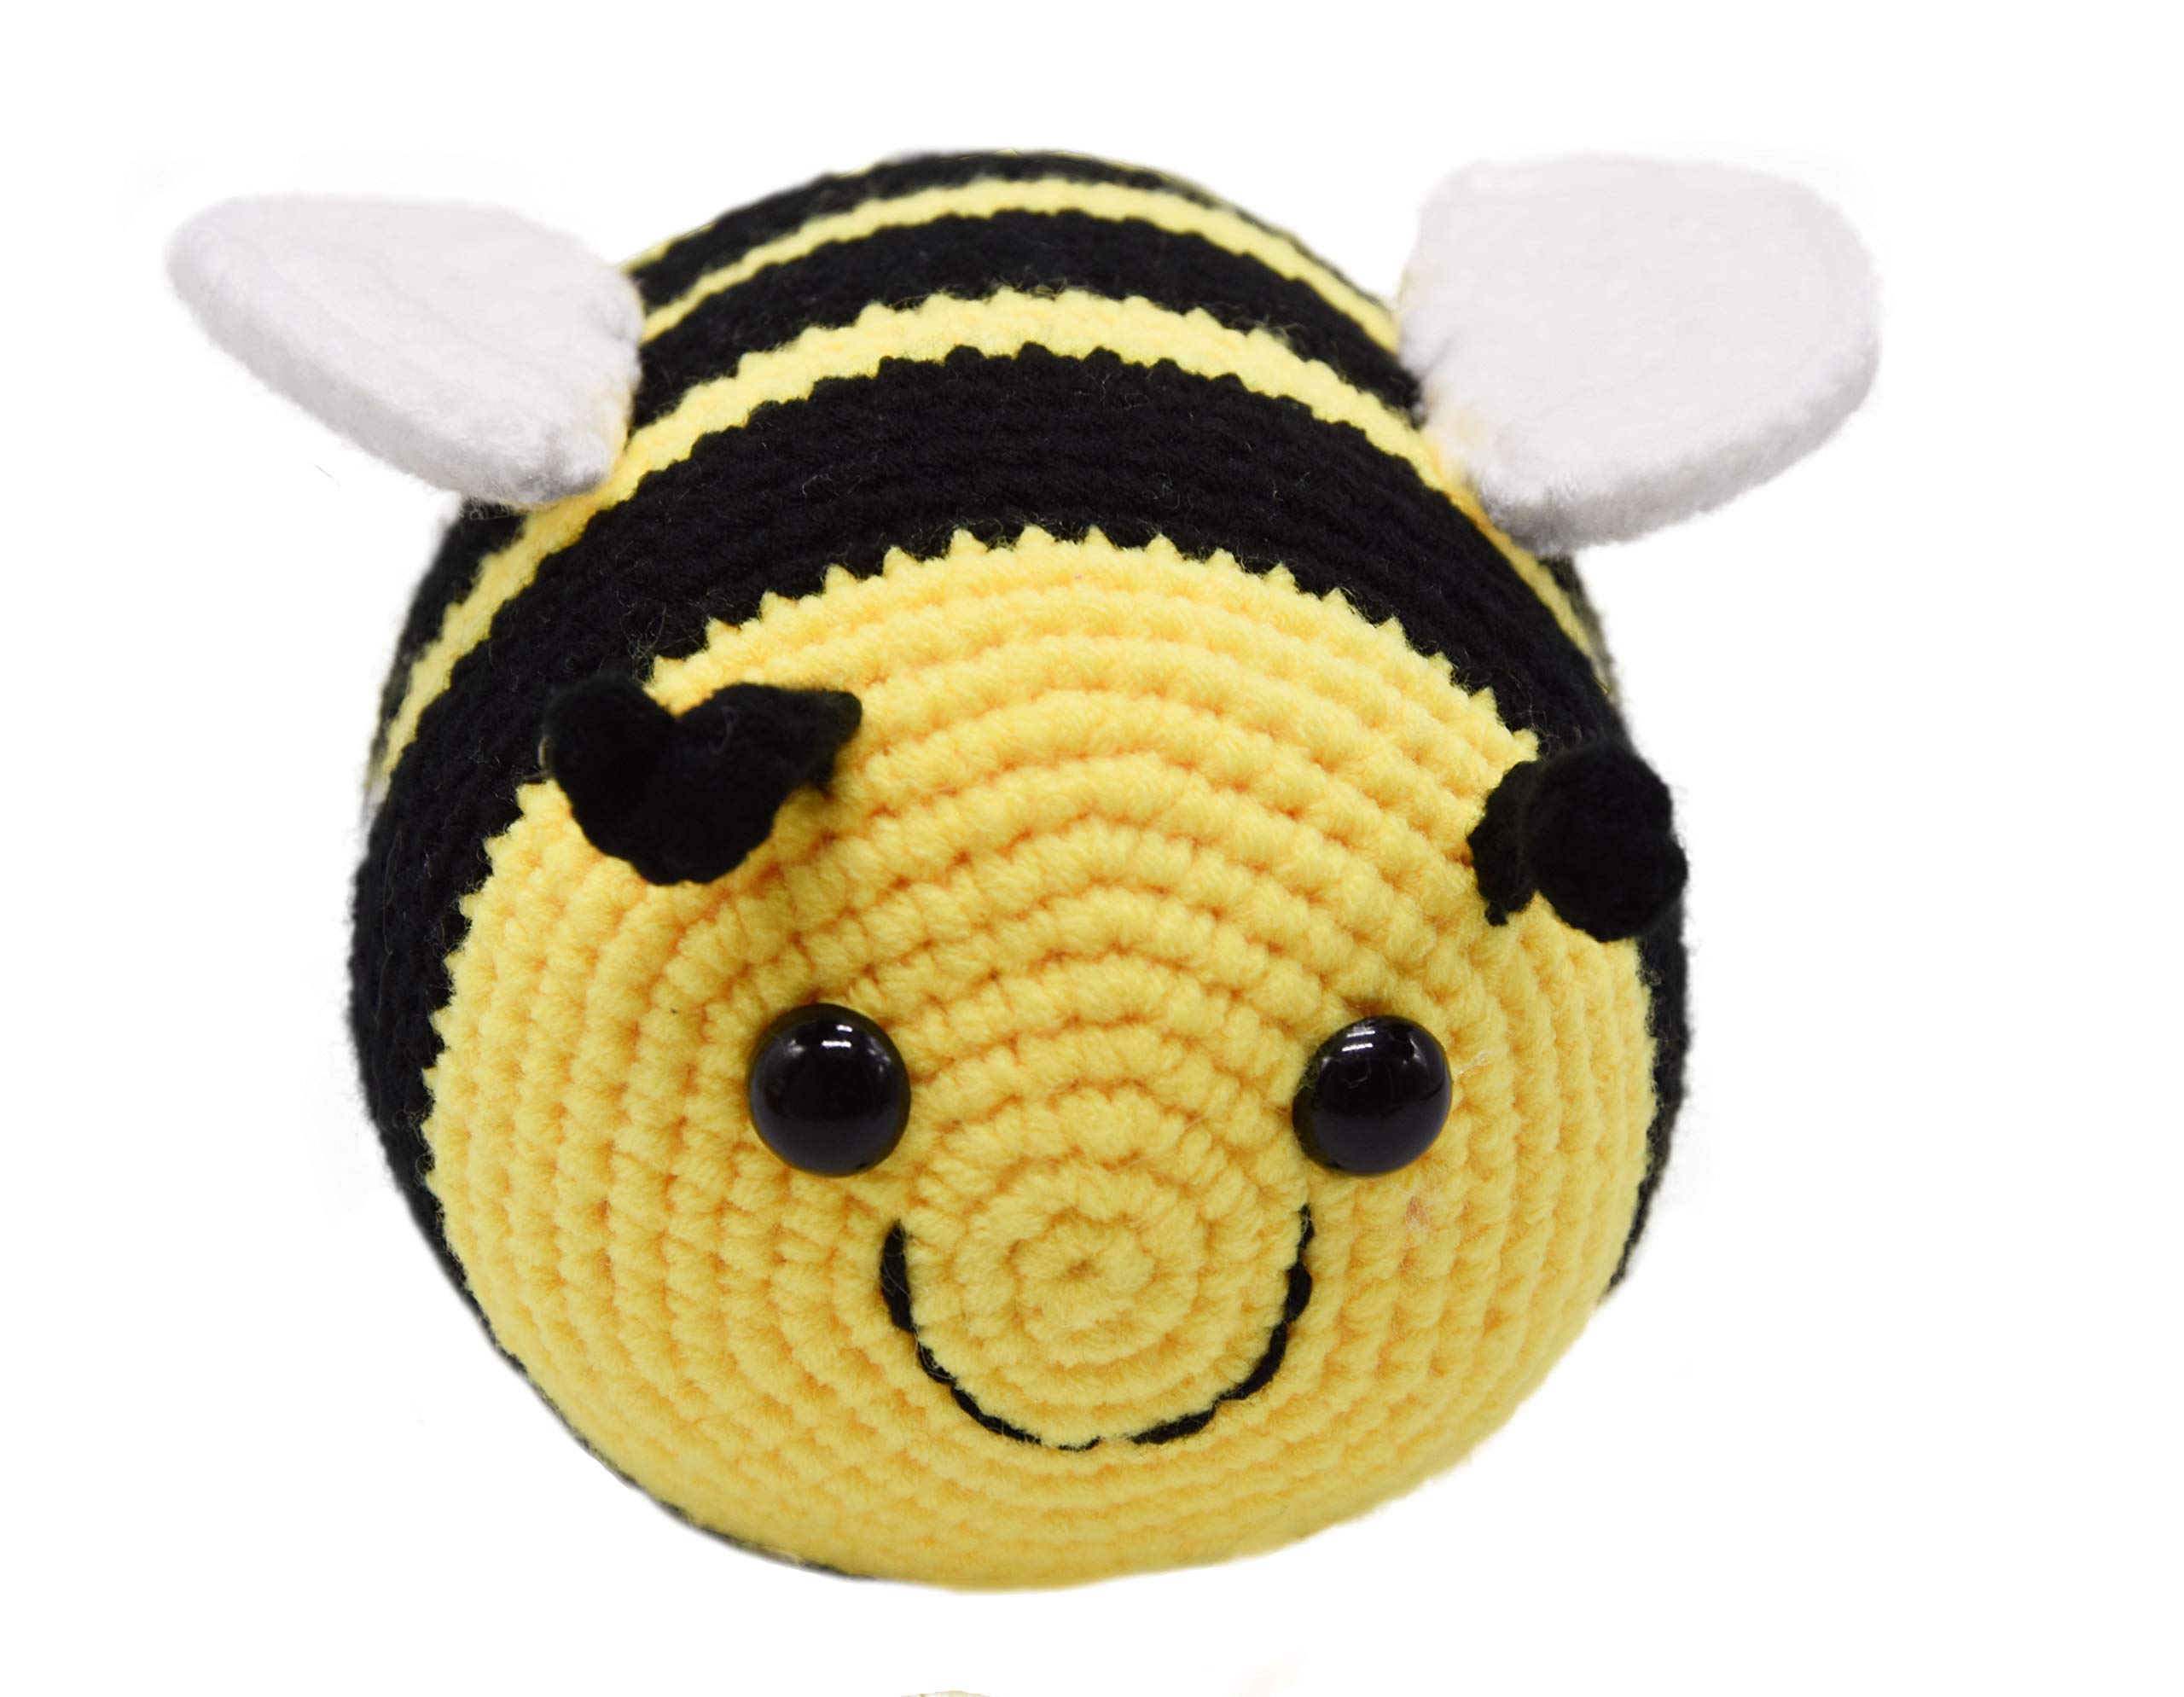 Mua Handmade Crochet Fuzzy Bumblebee Stuffed Animal with Smile Face and  White Wings Cuddly Knit Soft Yarn Plush Bee Toy Pretty Sweet Gifts for Kids  Boys and Girls Present for Birthday or